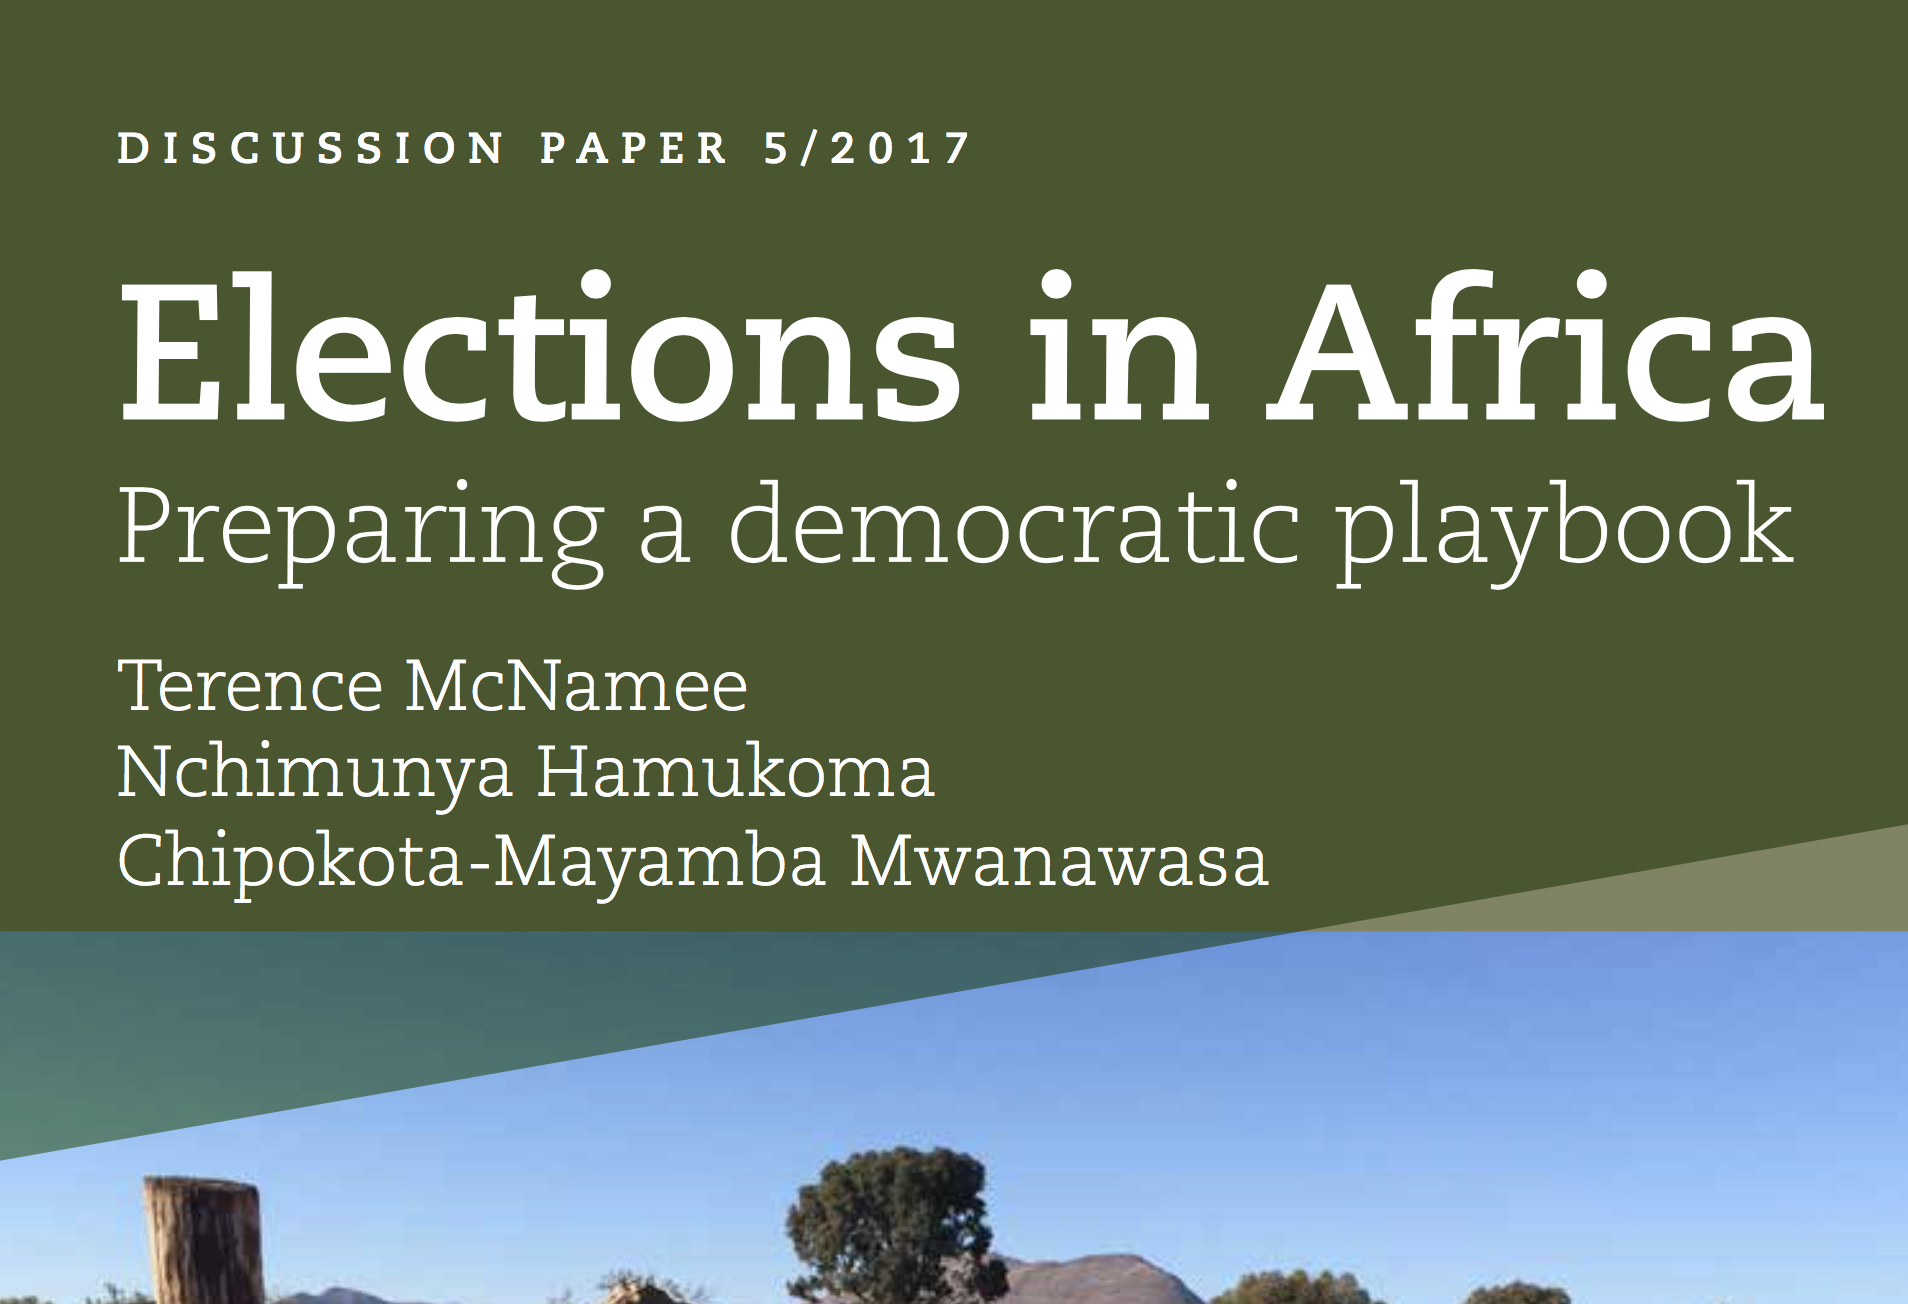 Elections in Africa: Preparing a democratic playbook